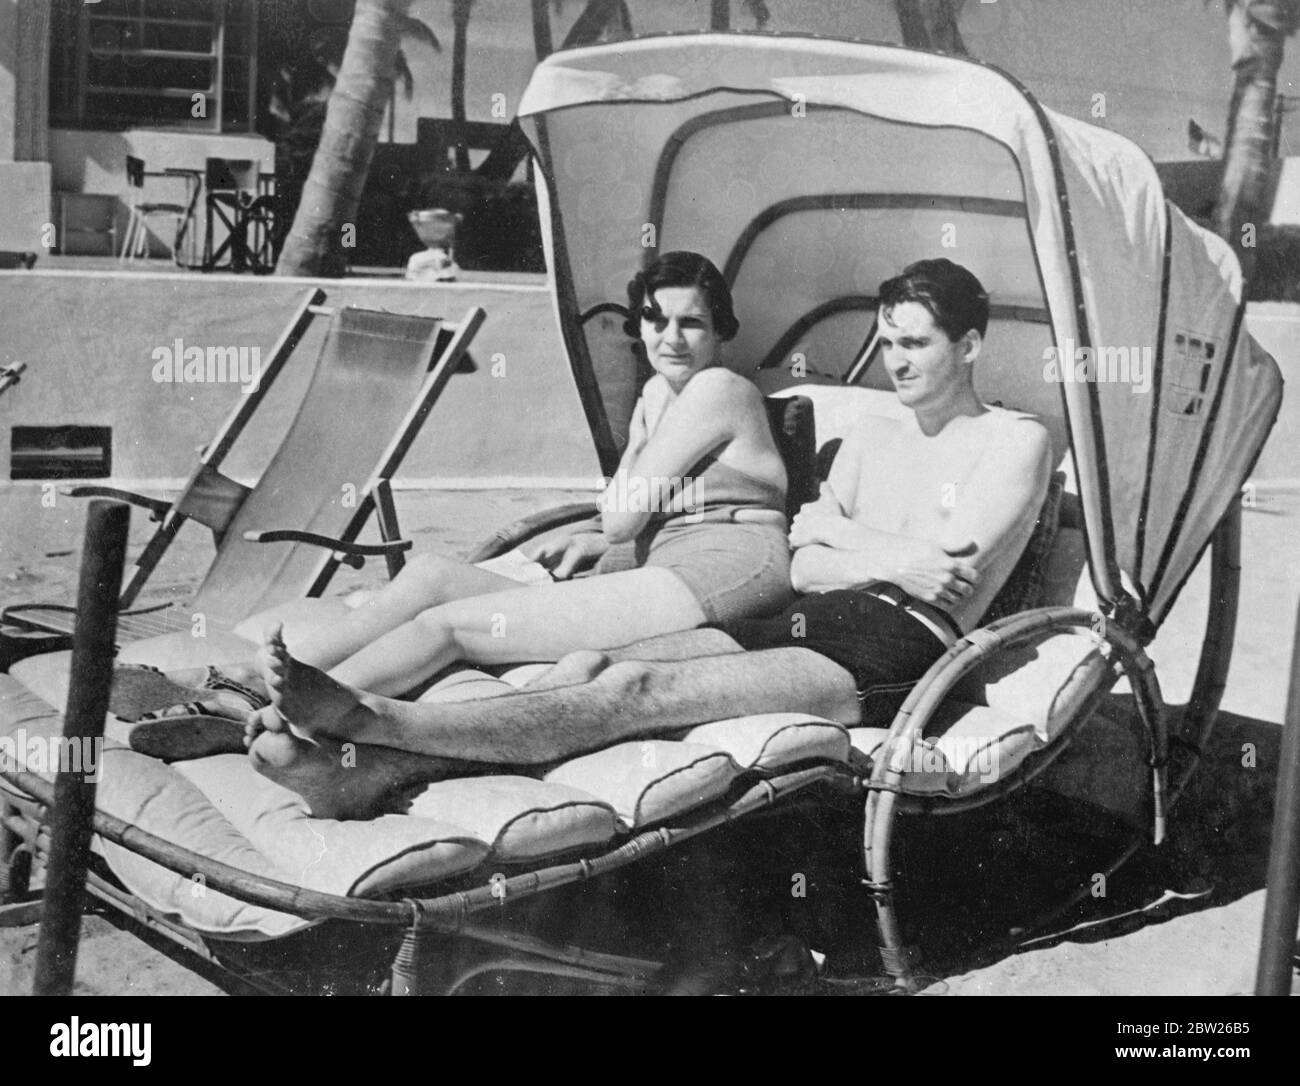 Lord and Lady Weymouth holidaying at Miami. Lord and Lady Weymouth sun bathing on the beach at Miami, Florida, where they are spending a holiday. Lady Weymouth is the son of the Marquis of bath. Lady Weymouth is the eldest daughter of Lord Vivian. 6 February 1938 Stock Photo